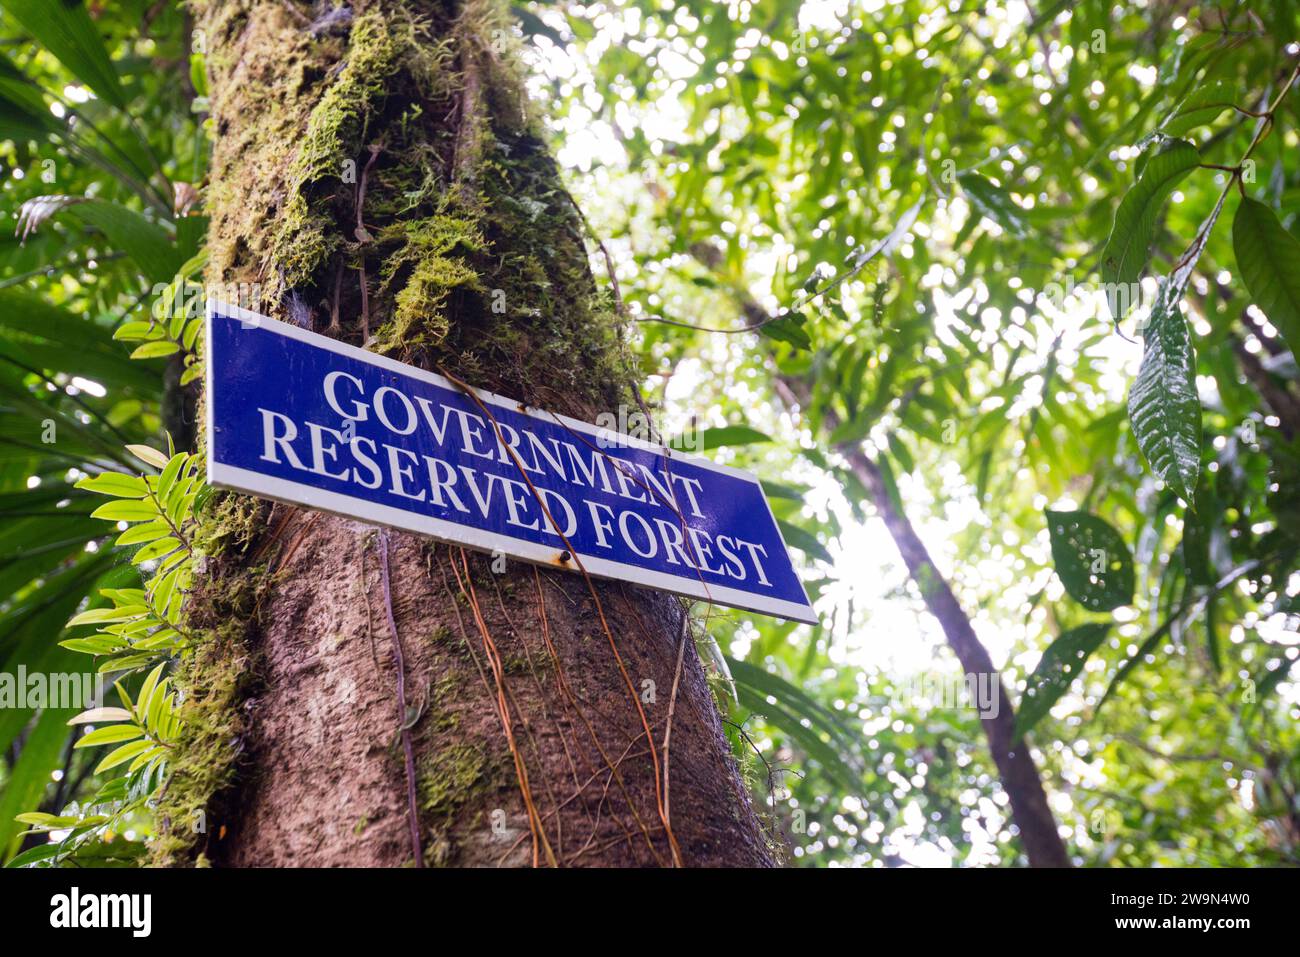 A sign designates the beginning of the Government Reserved Forest on Section 8 of the Waitukubuli National Trail on the Caribbean island of Dominica. Stock Photo